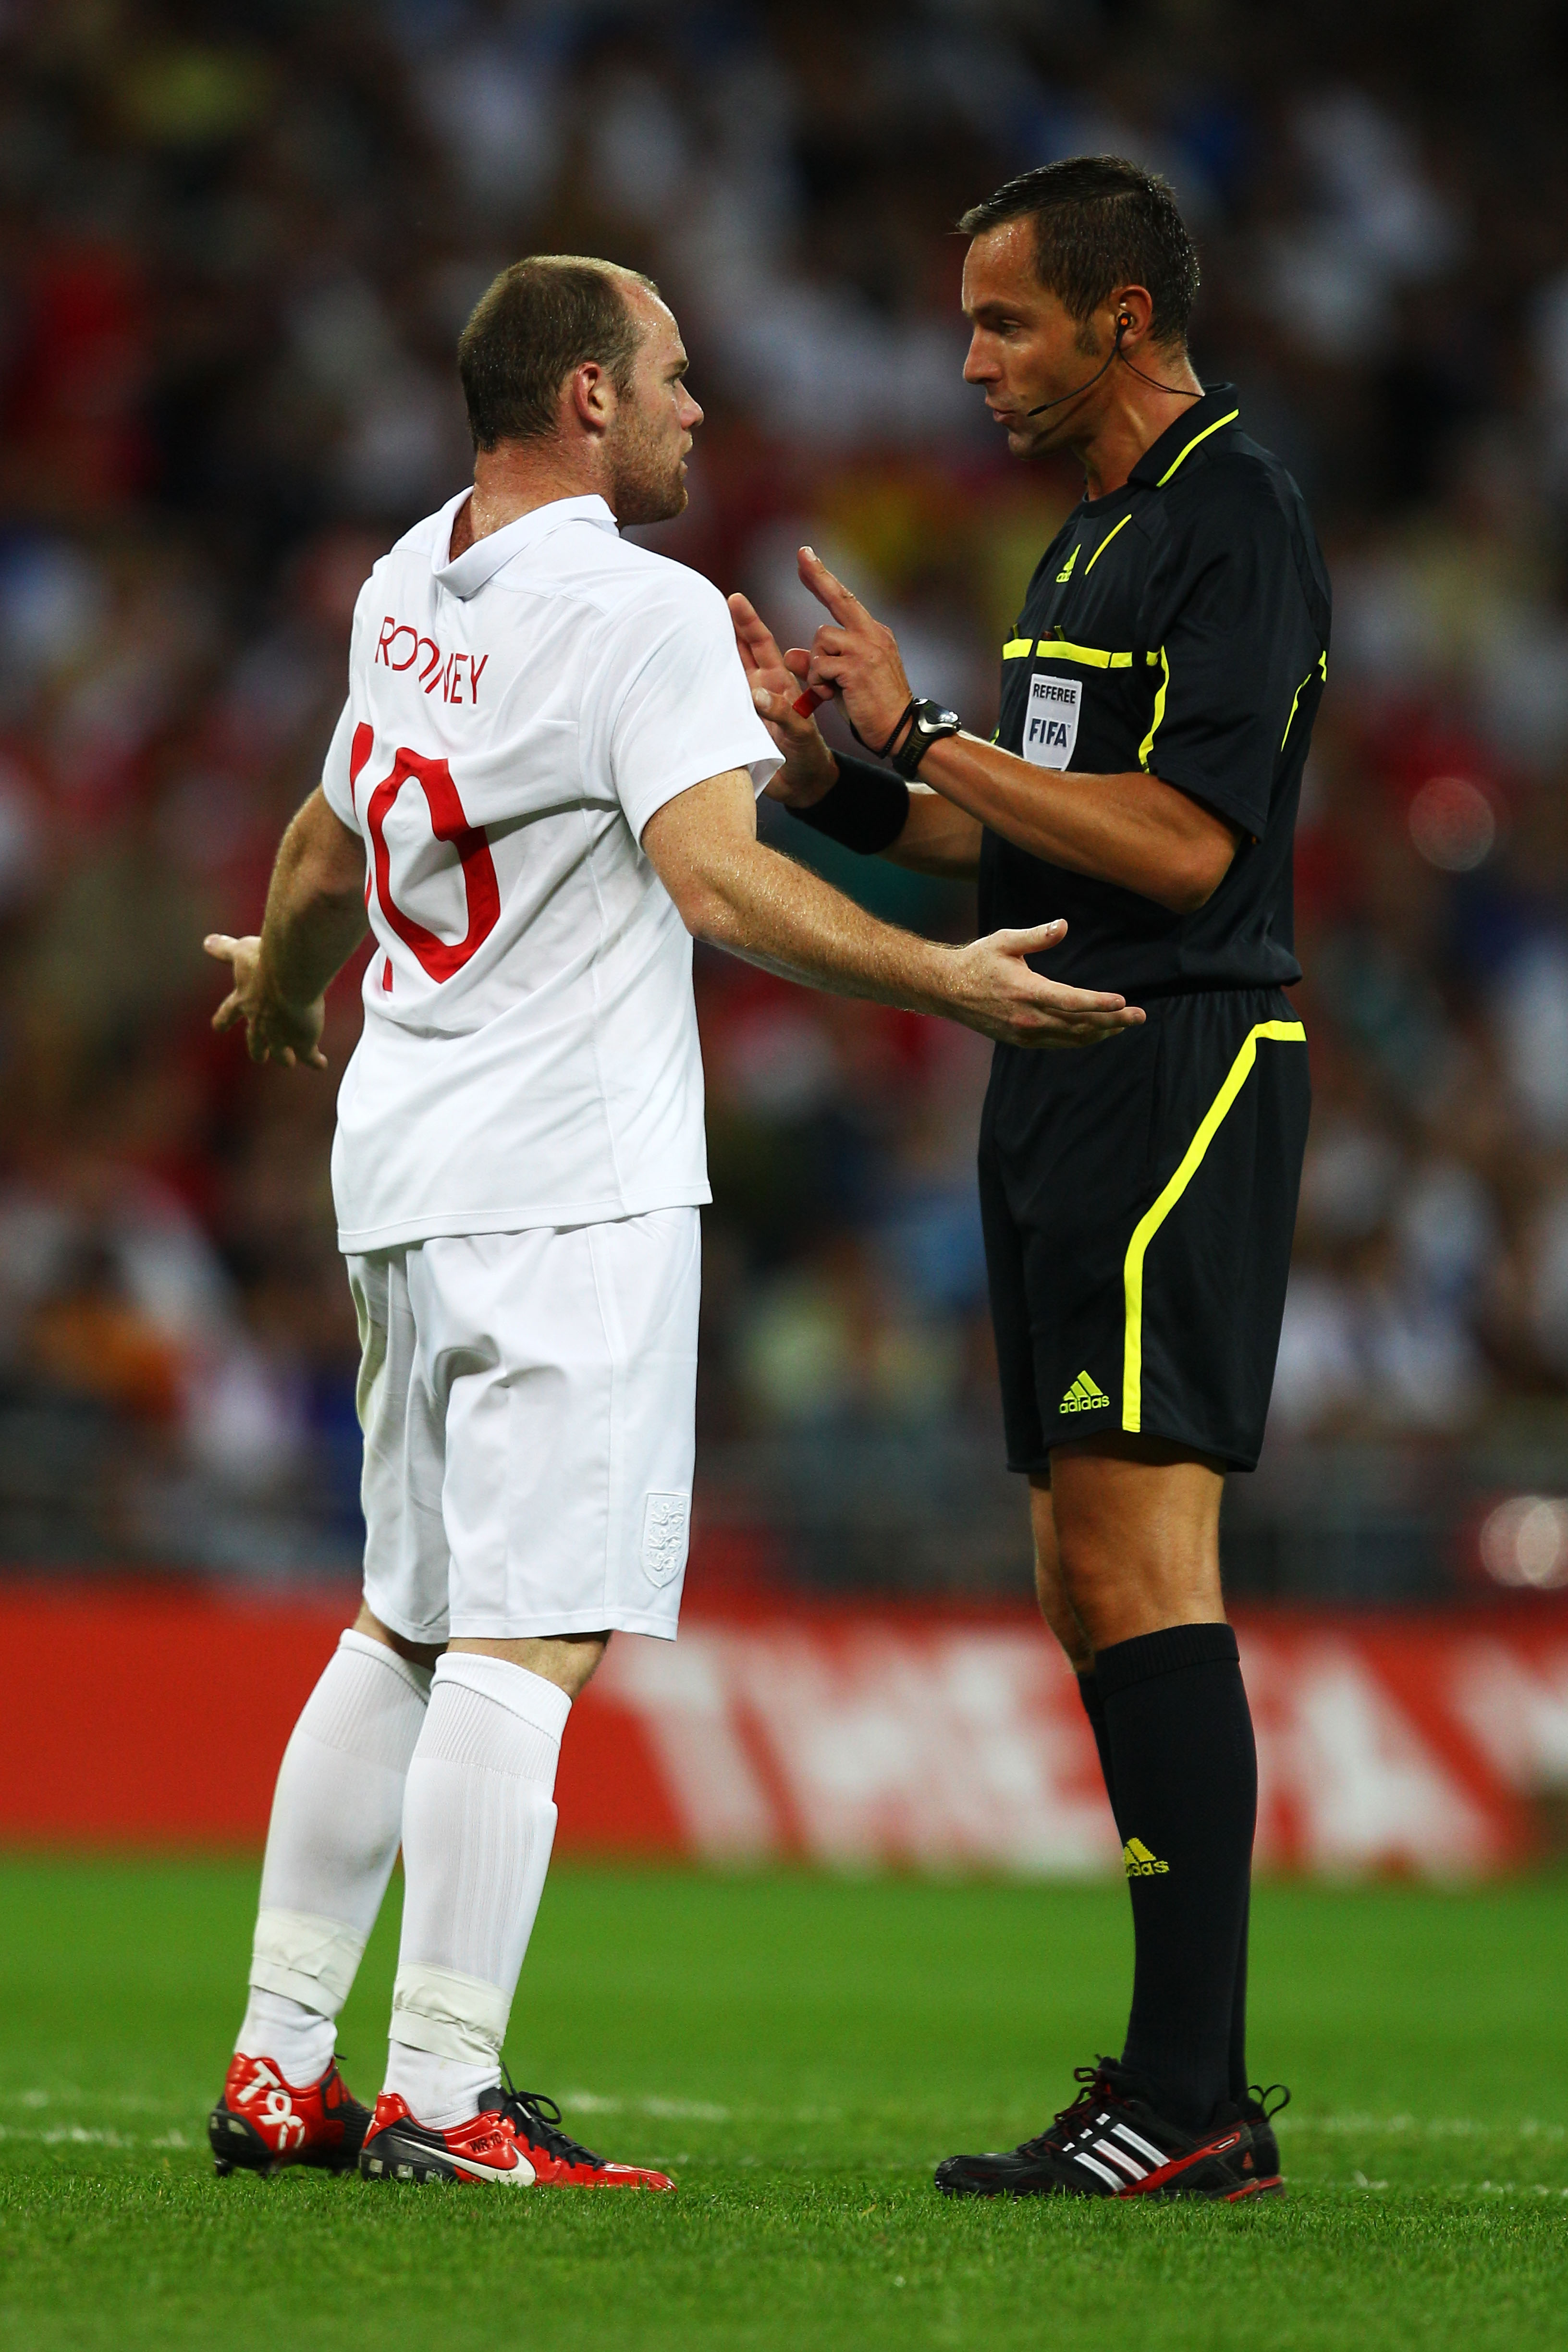 LONDON, ENGLAND - AUGUST 11:  Wayne Rooney of England reacts as he is spoken to by Referee Stephane Lannoy of France during the International Friendly match between England and Hungary at Wembley Stadium on August 11, 2010 in London, England.  (Photo by R